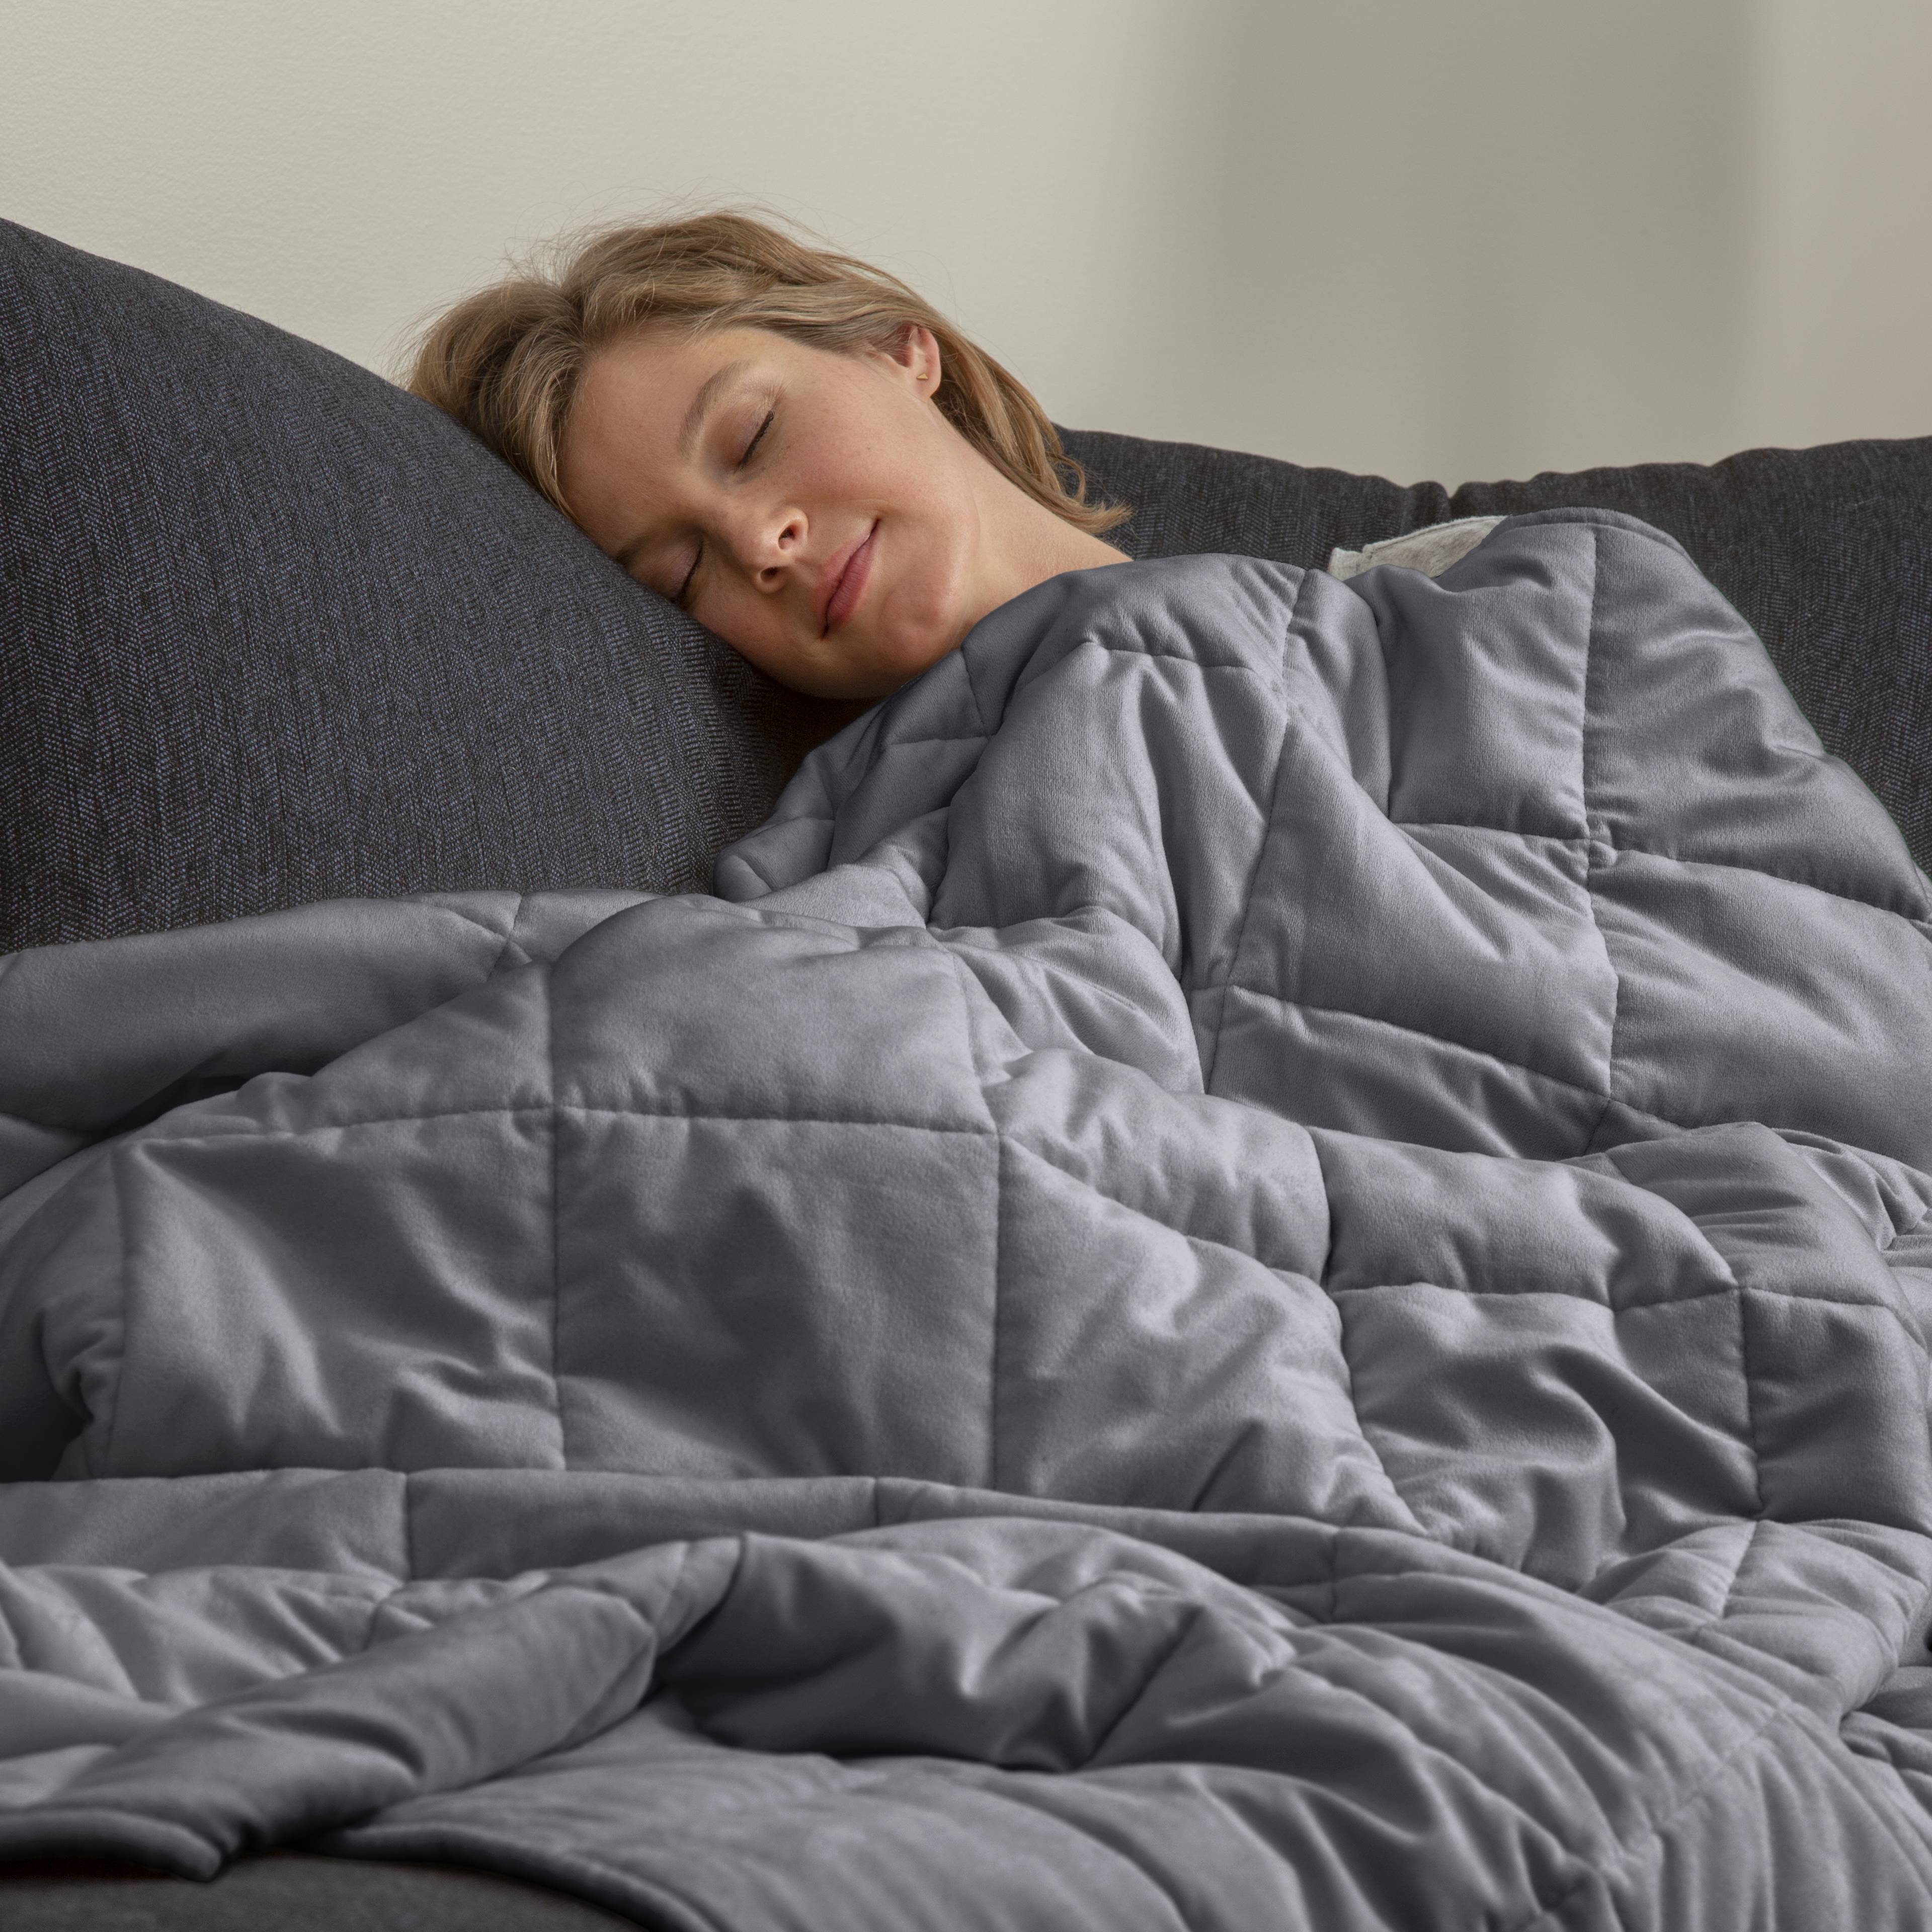 Our Tranquility Weighted Blanket Review - The Sleep Judge